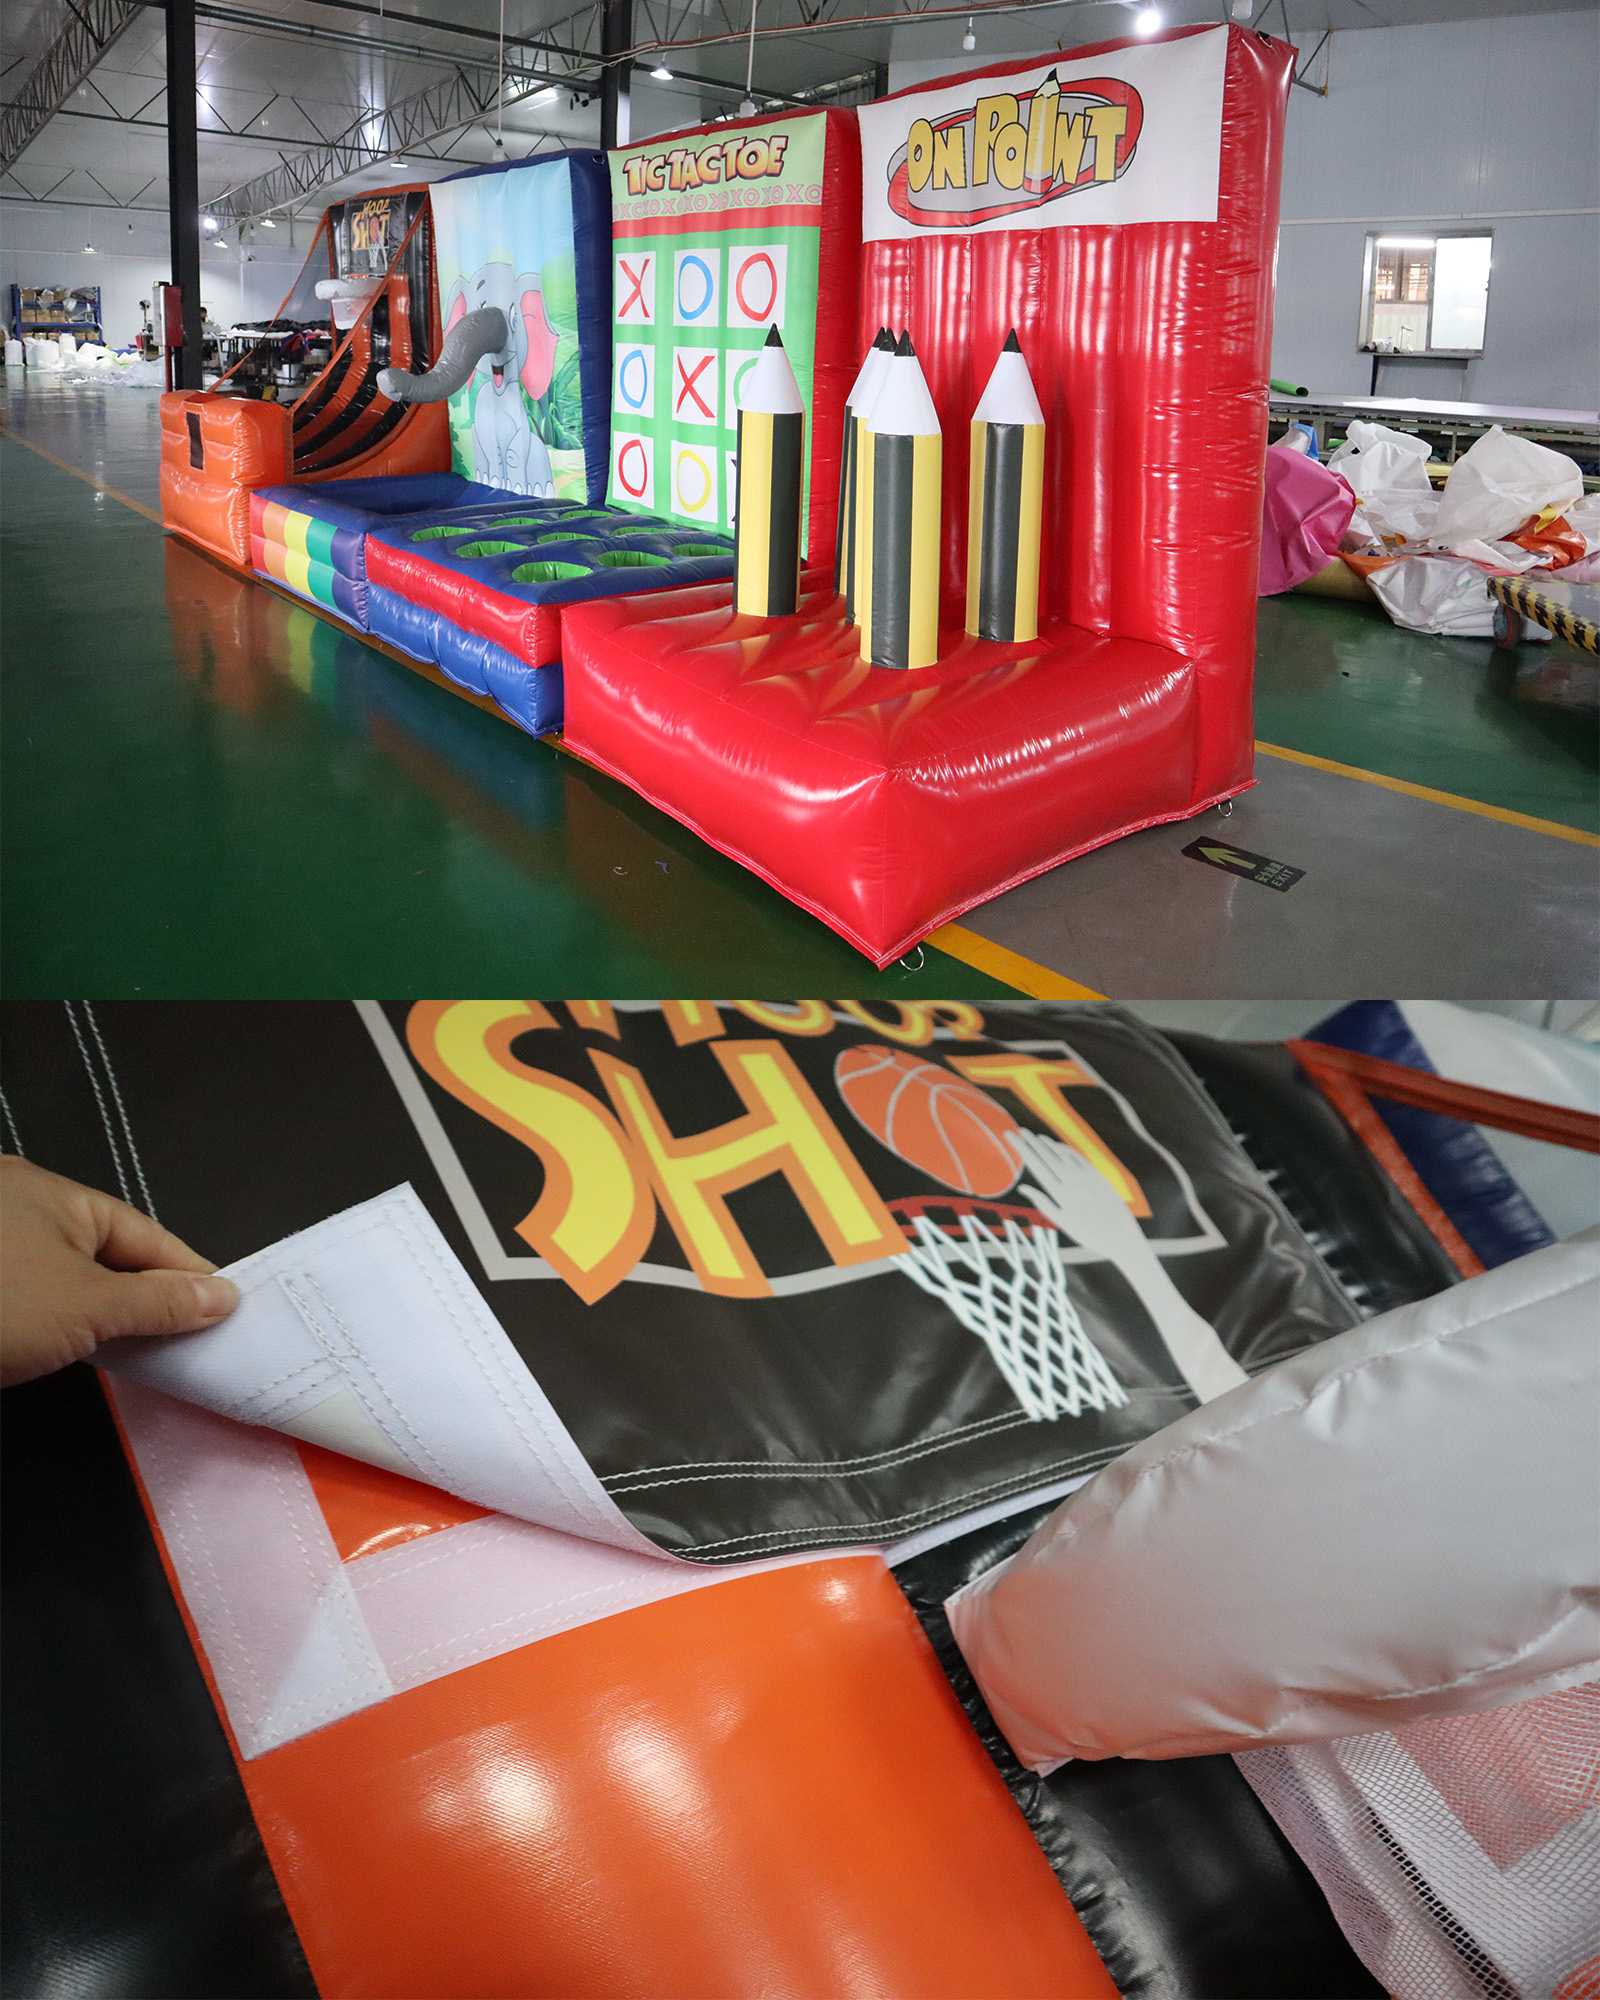  inflatable new carnival games for sales with oxford fabric light material